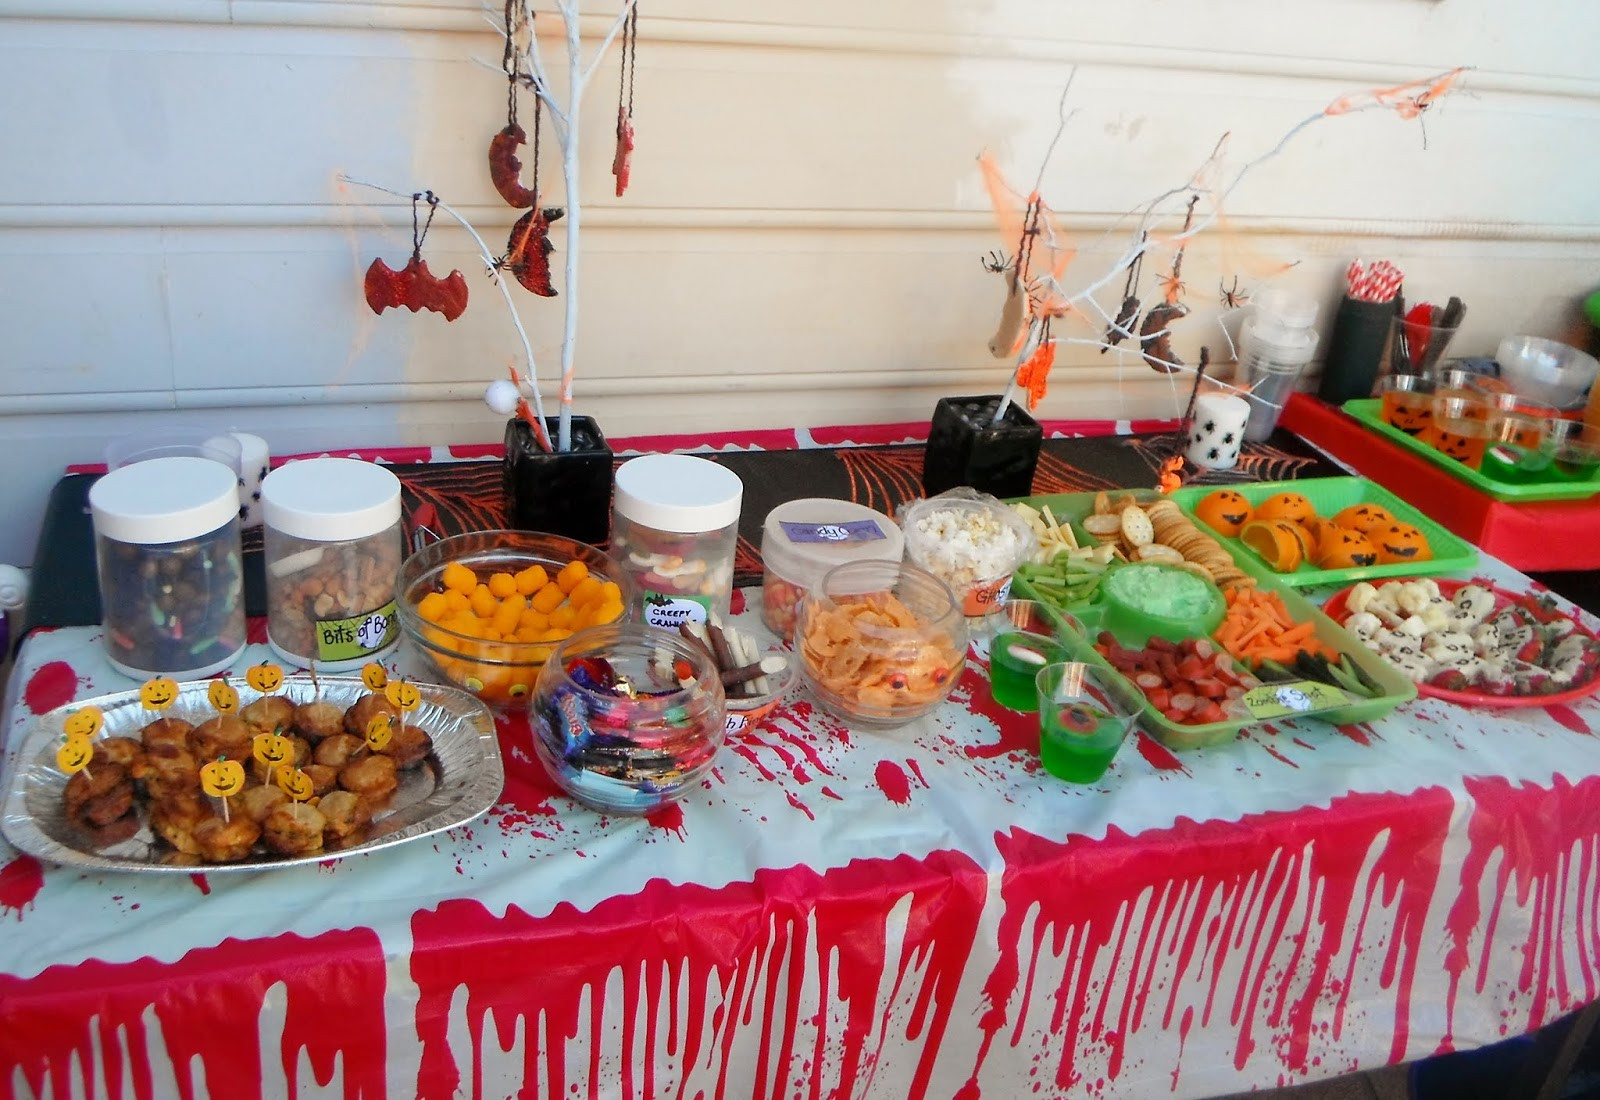 Kids Halloween Party Food Ideas
 Adventures at home with Mum Halloween Party Food